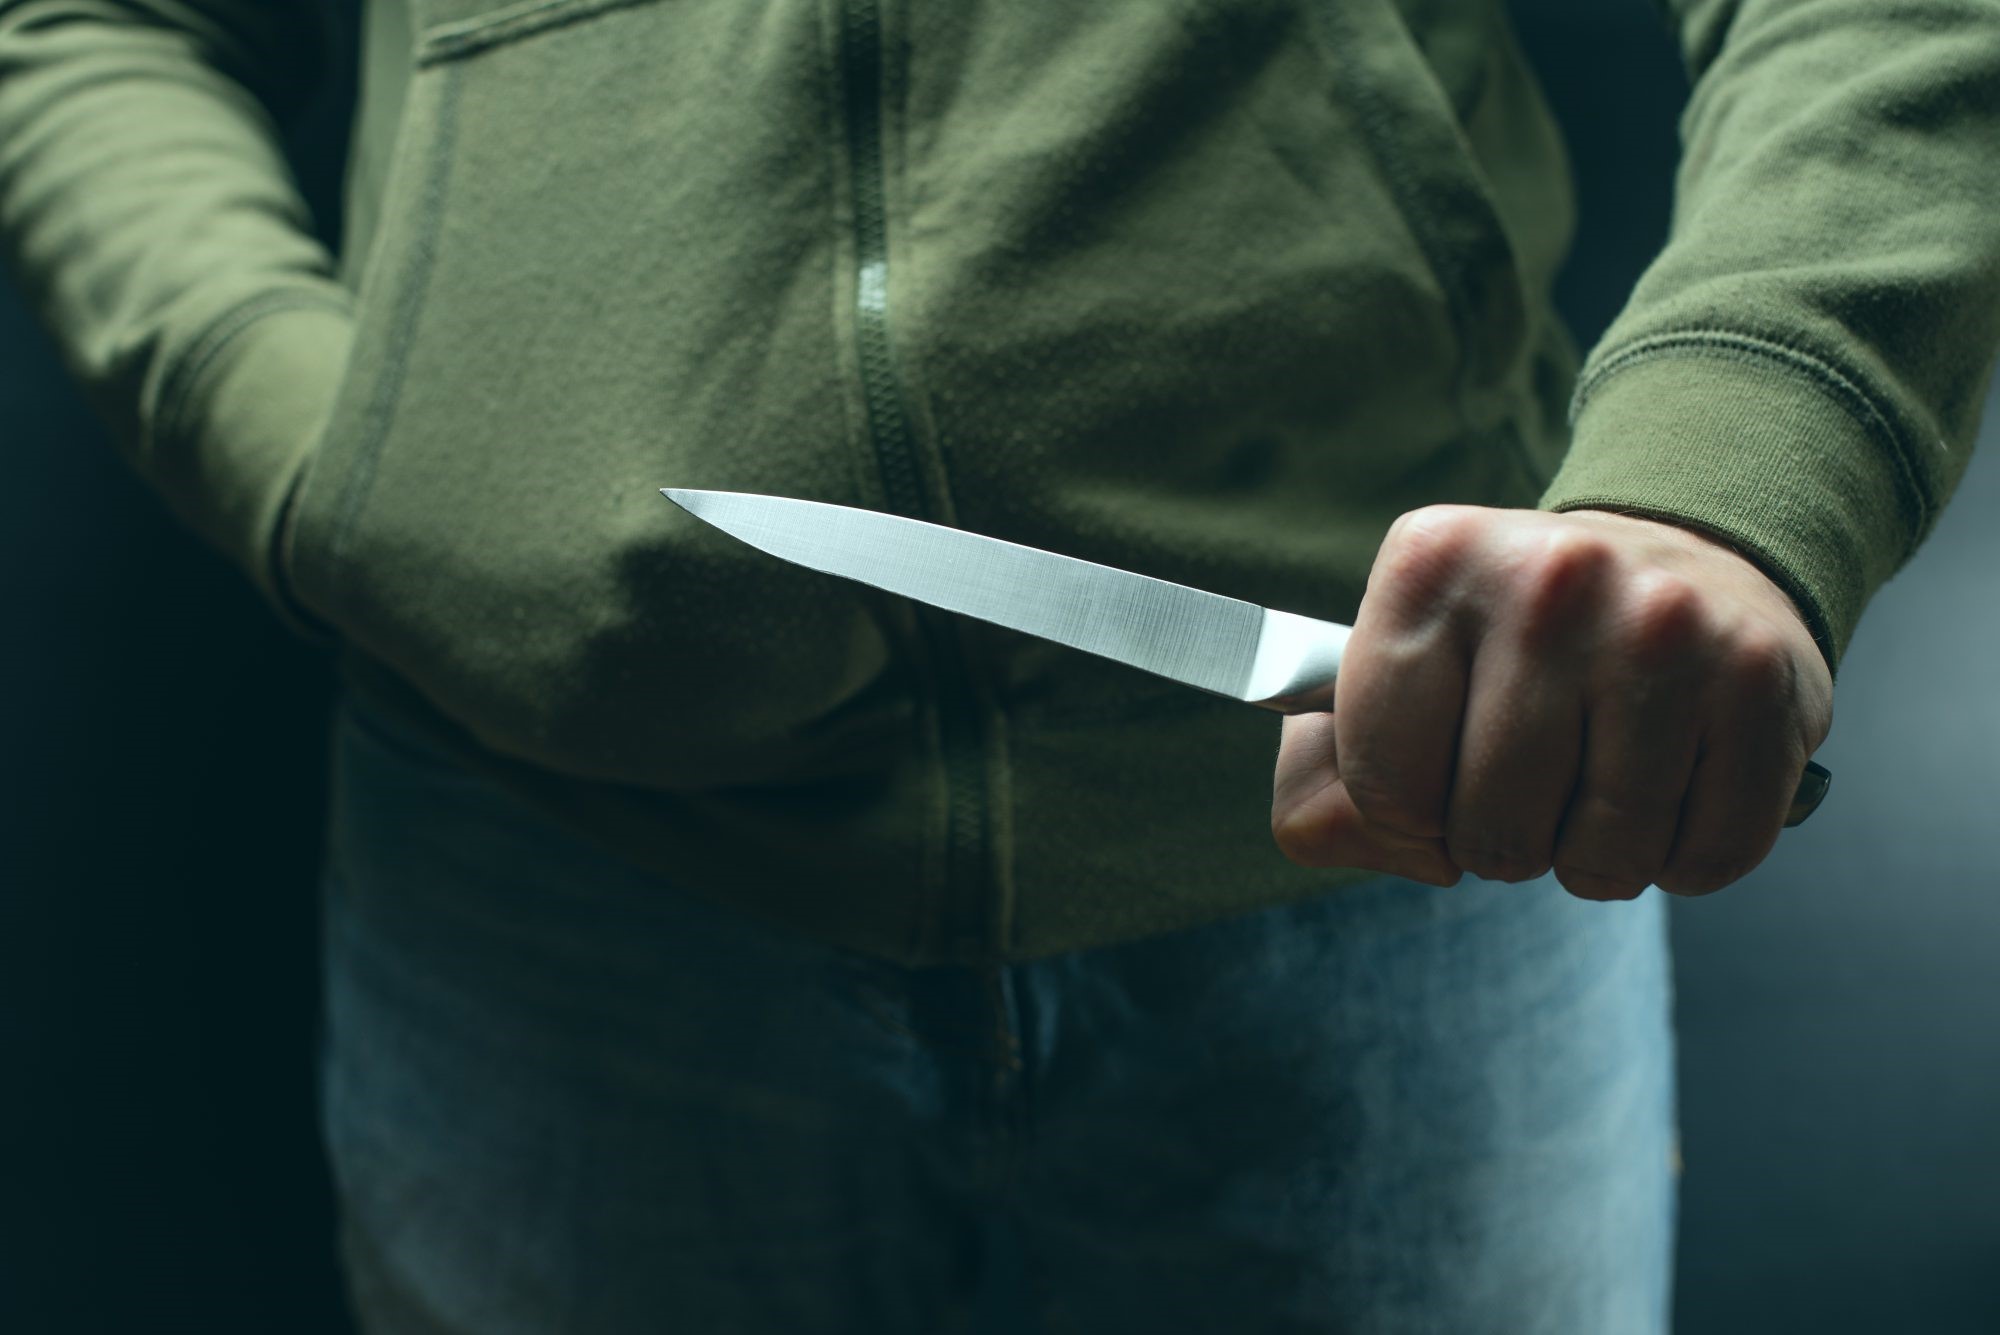 13-facts-about-knife-crime-awareness-week-may-15th-to-may-21st